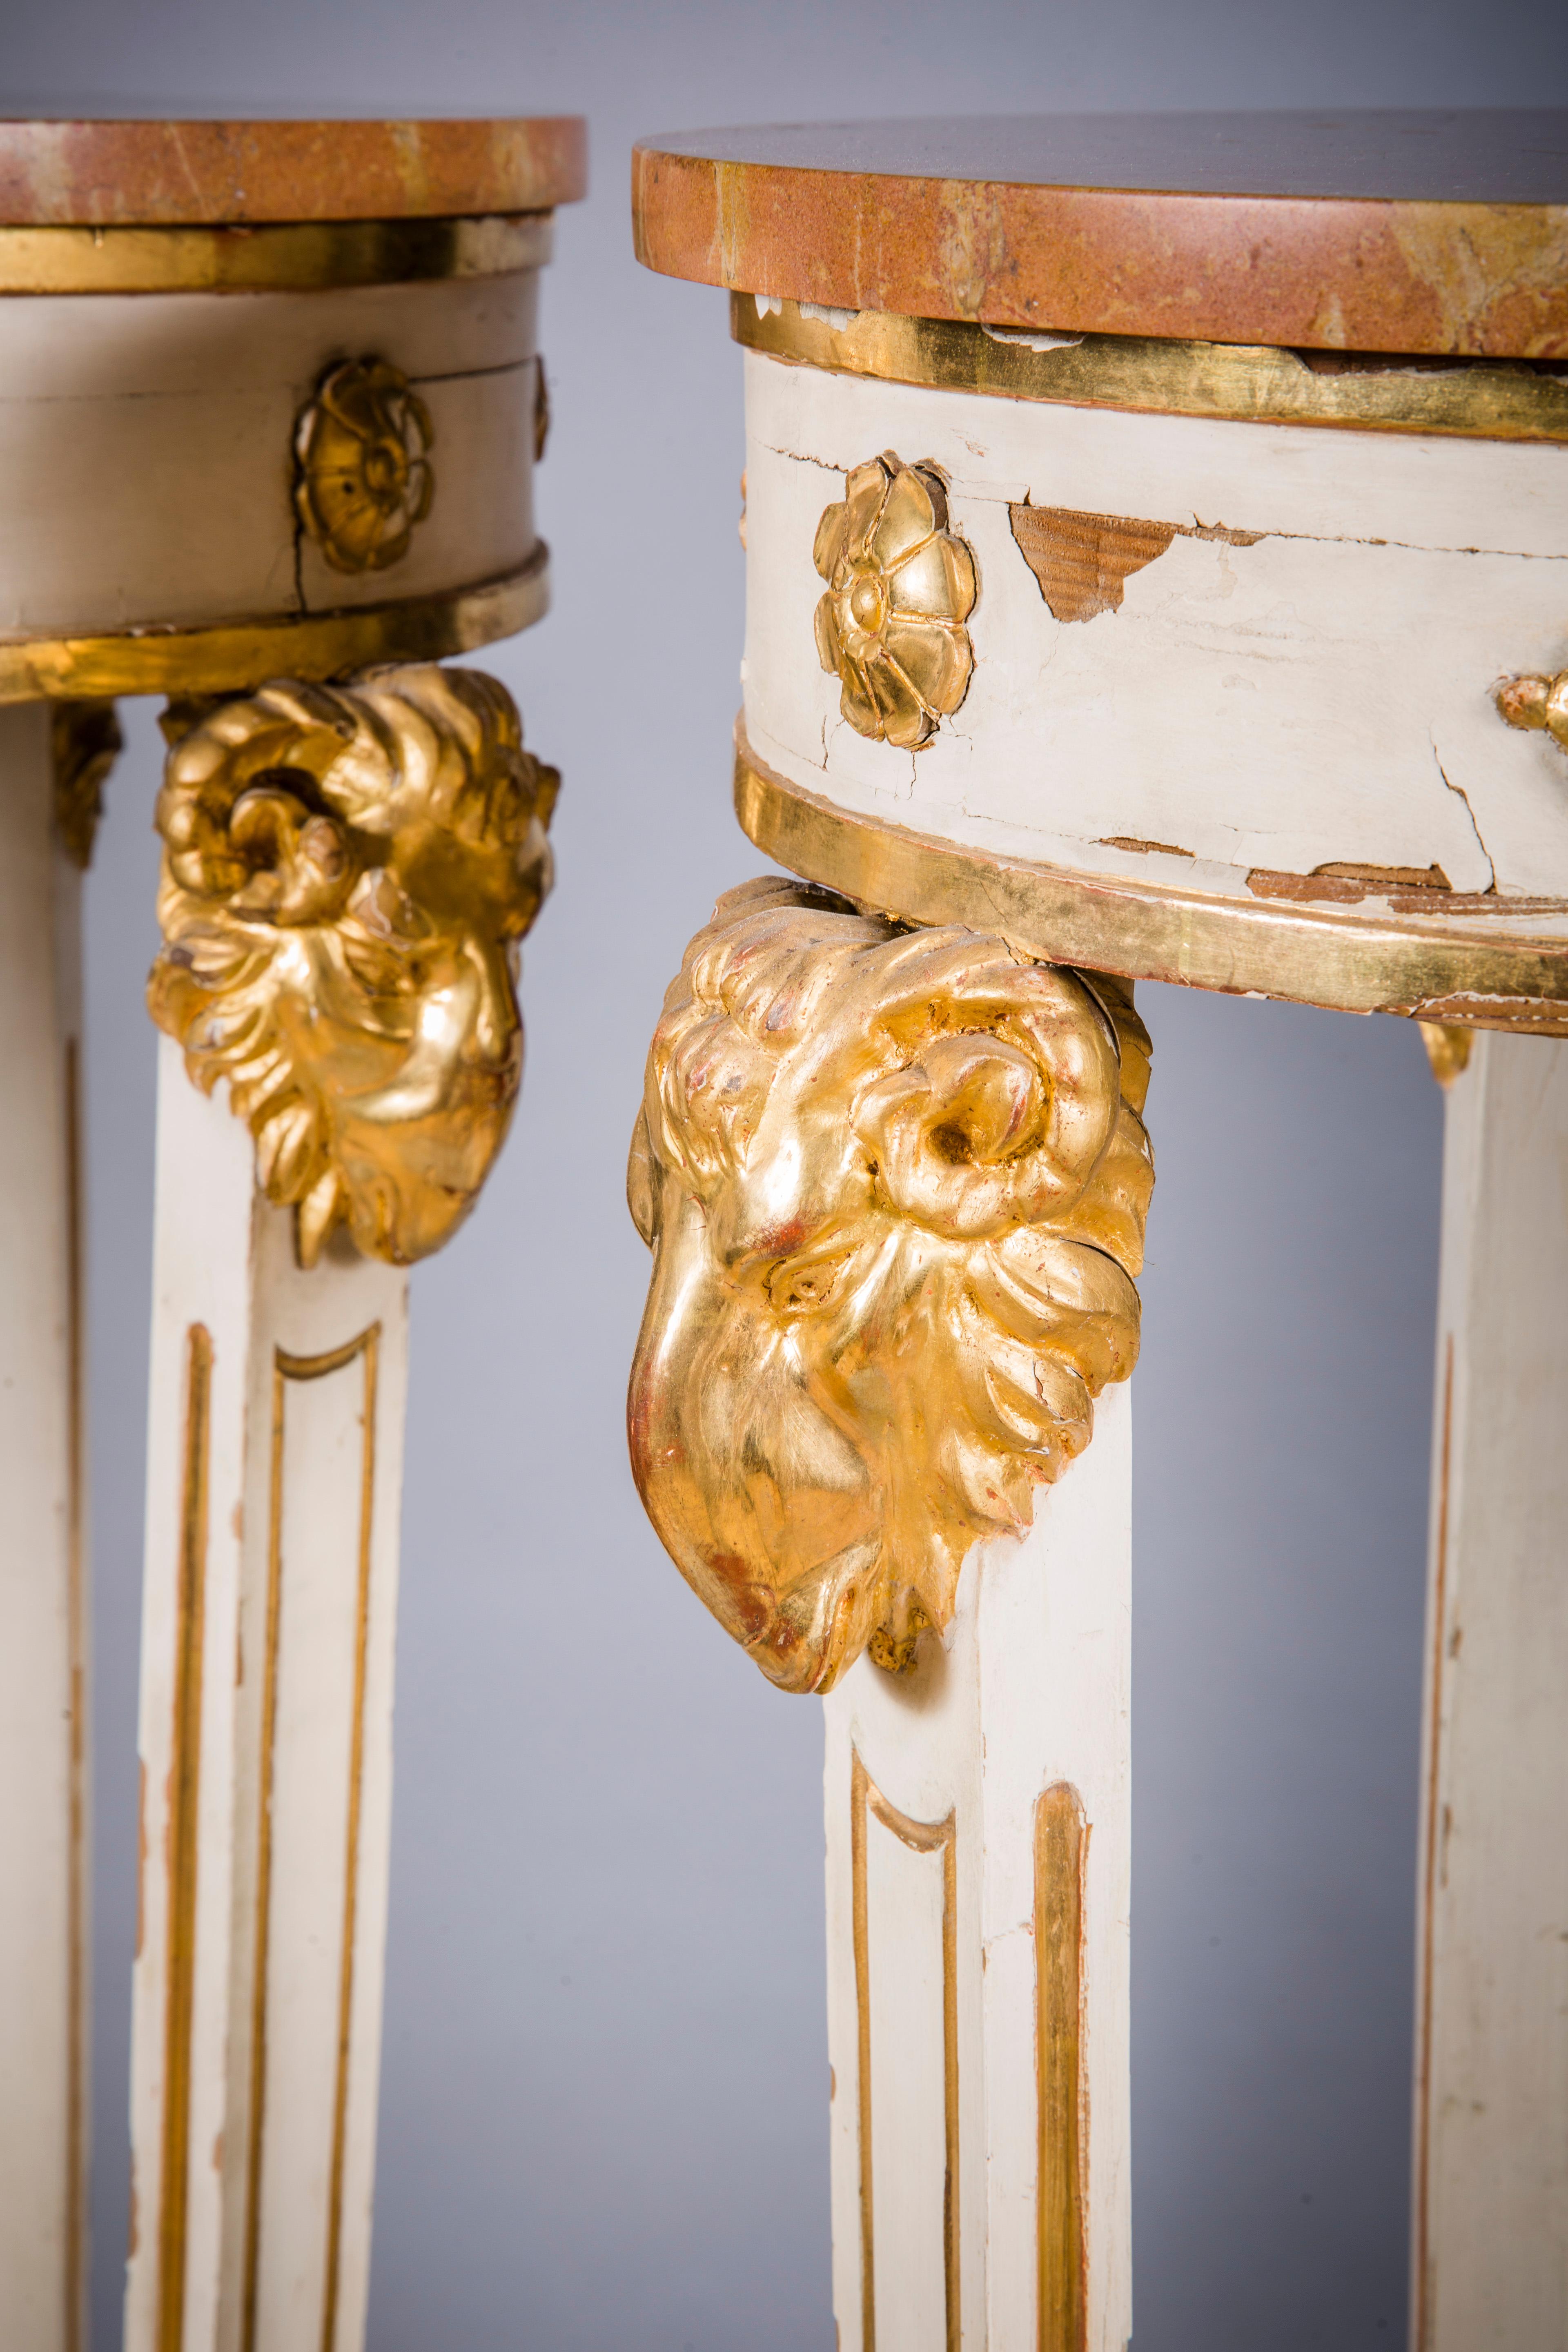 Pair Italian Early 19th century Neoclassical pantinted and Parcel-gilt pedestals 
Each fitted with a circular marble top. 
56 1/2 x 16 in. diam. 

Provenance: Lou Marotta Antiques, New York, NY. 

IVN: 2443.